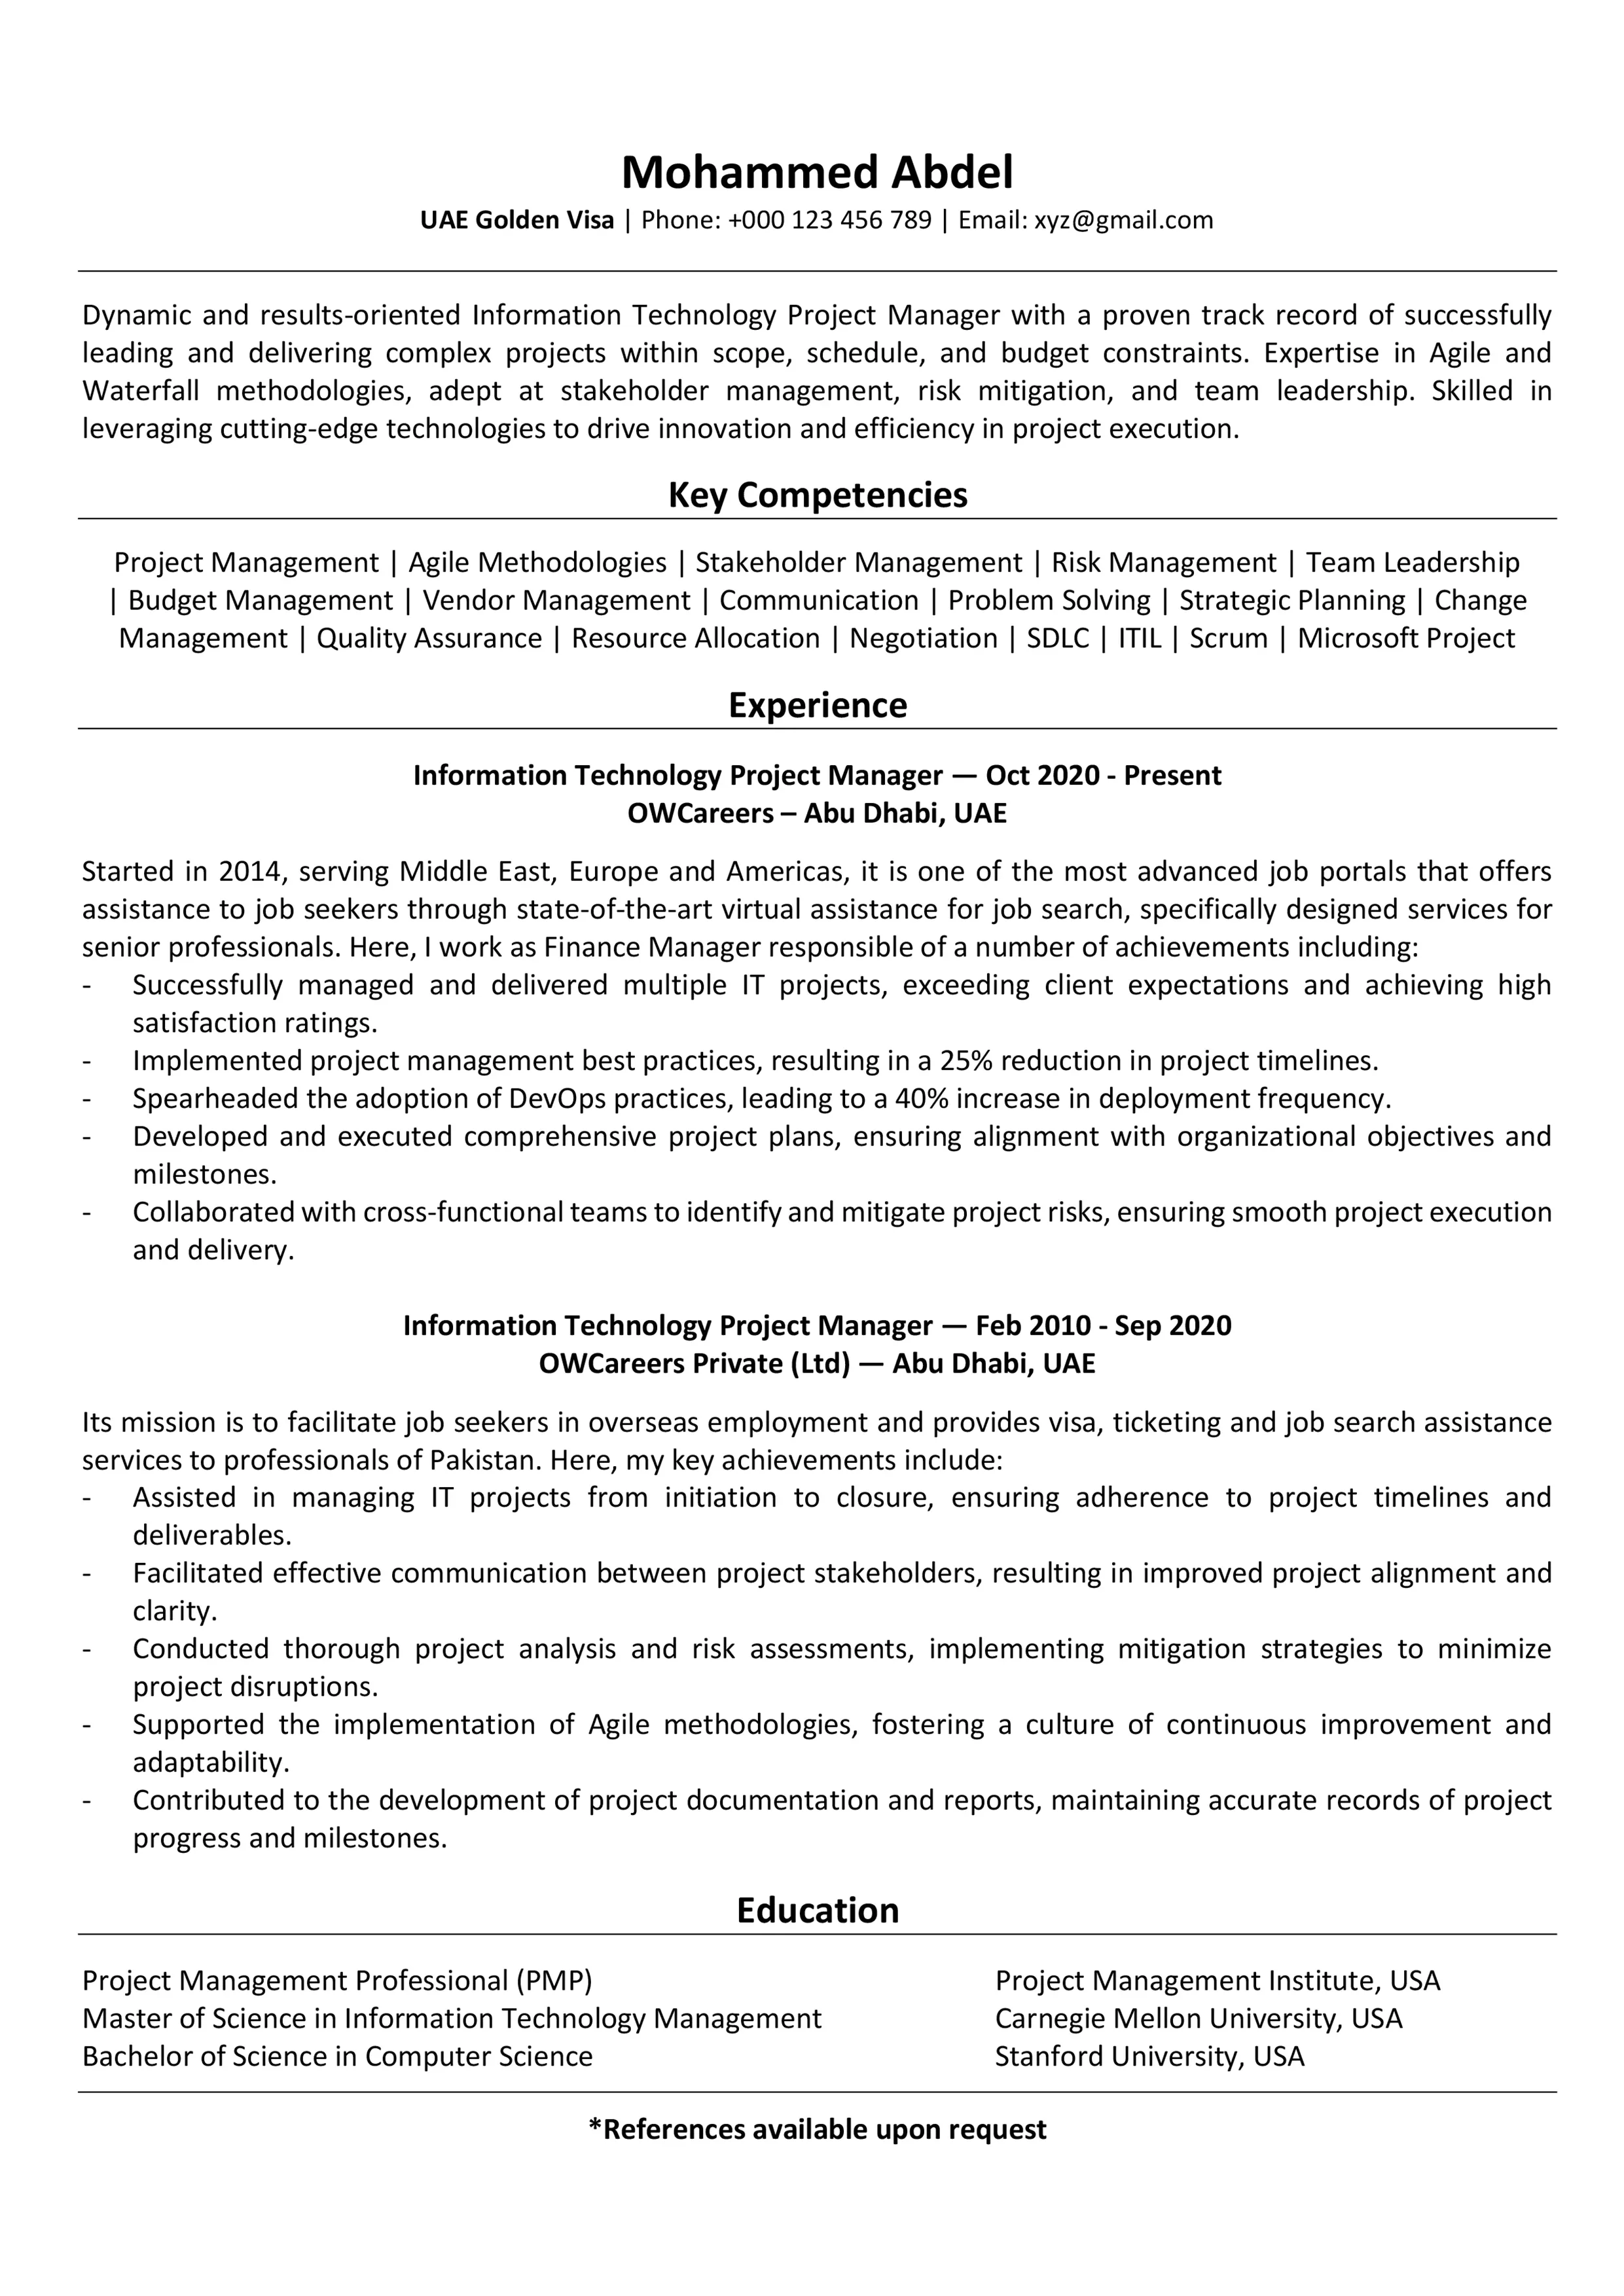 Information Technology Project Manager CV